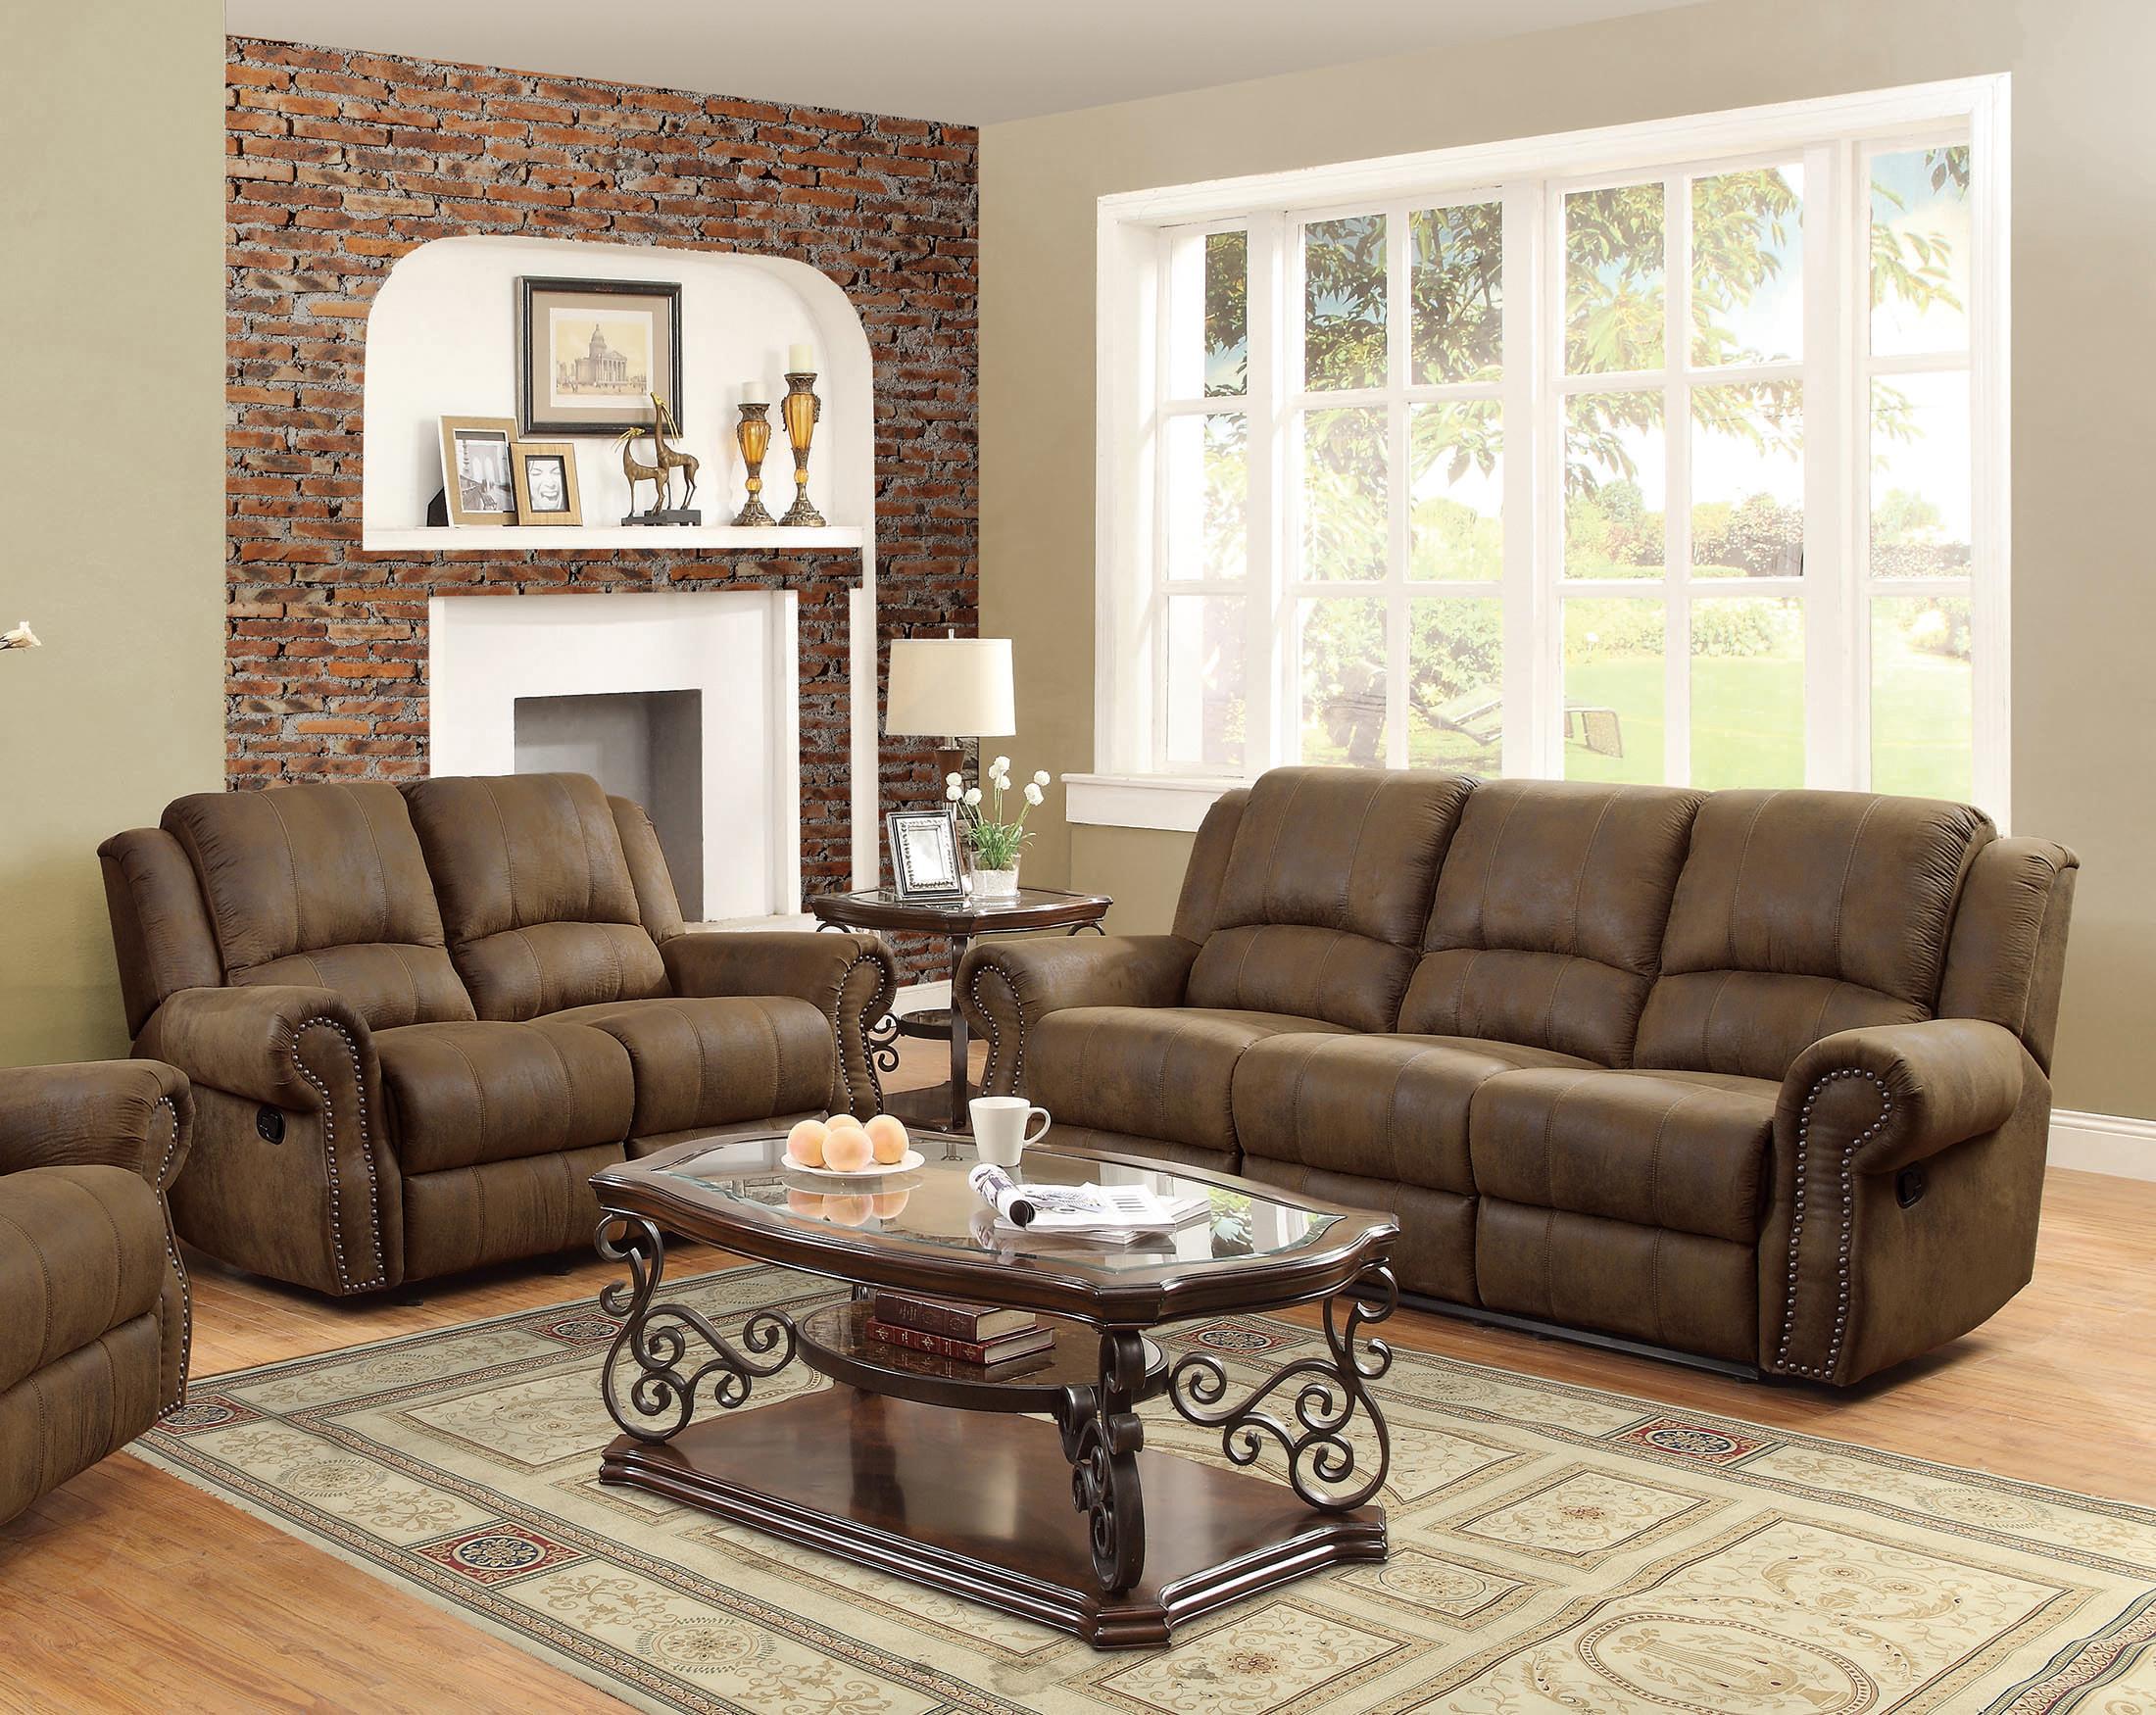 Traditional Living Room Set 650151-S2 Sir Rawlinson 650151-S2 in Brown 